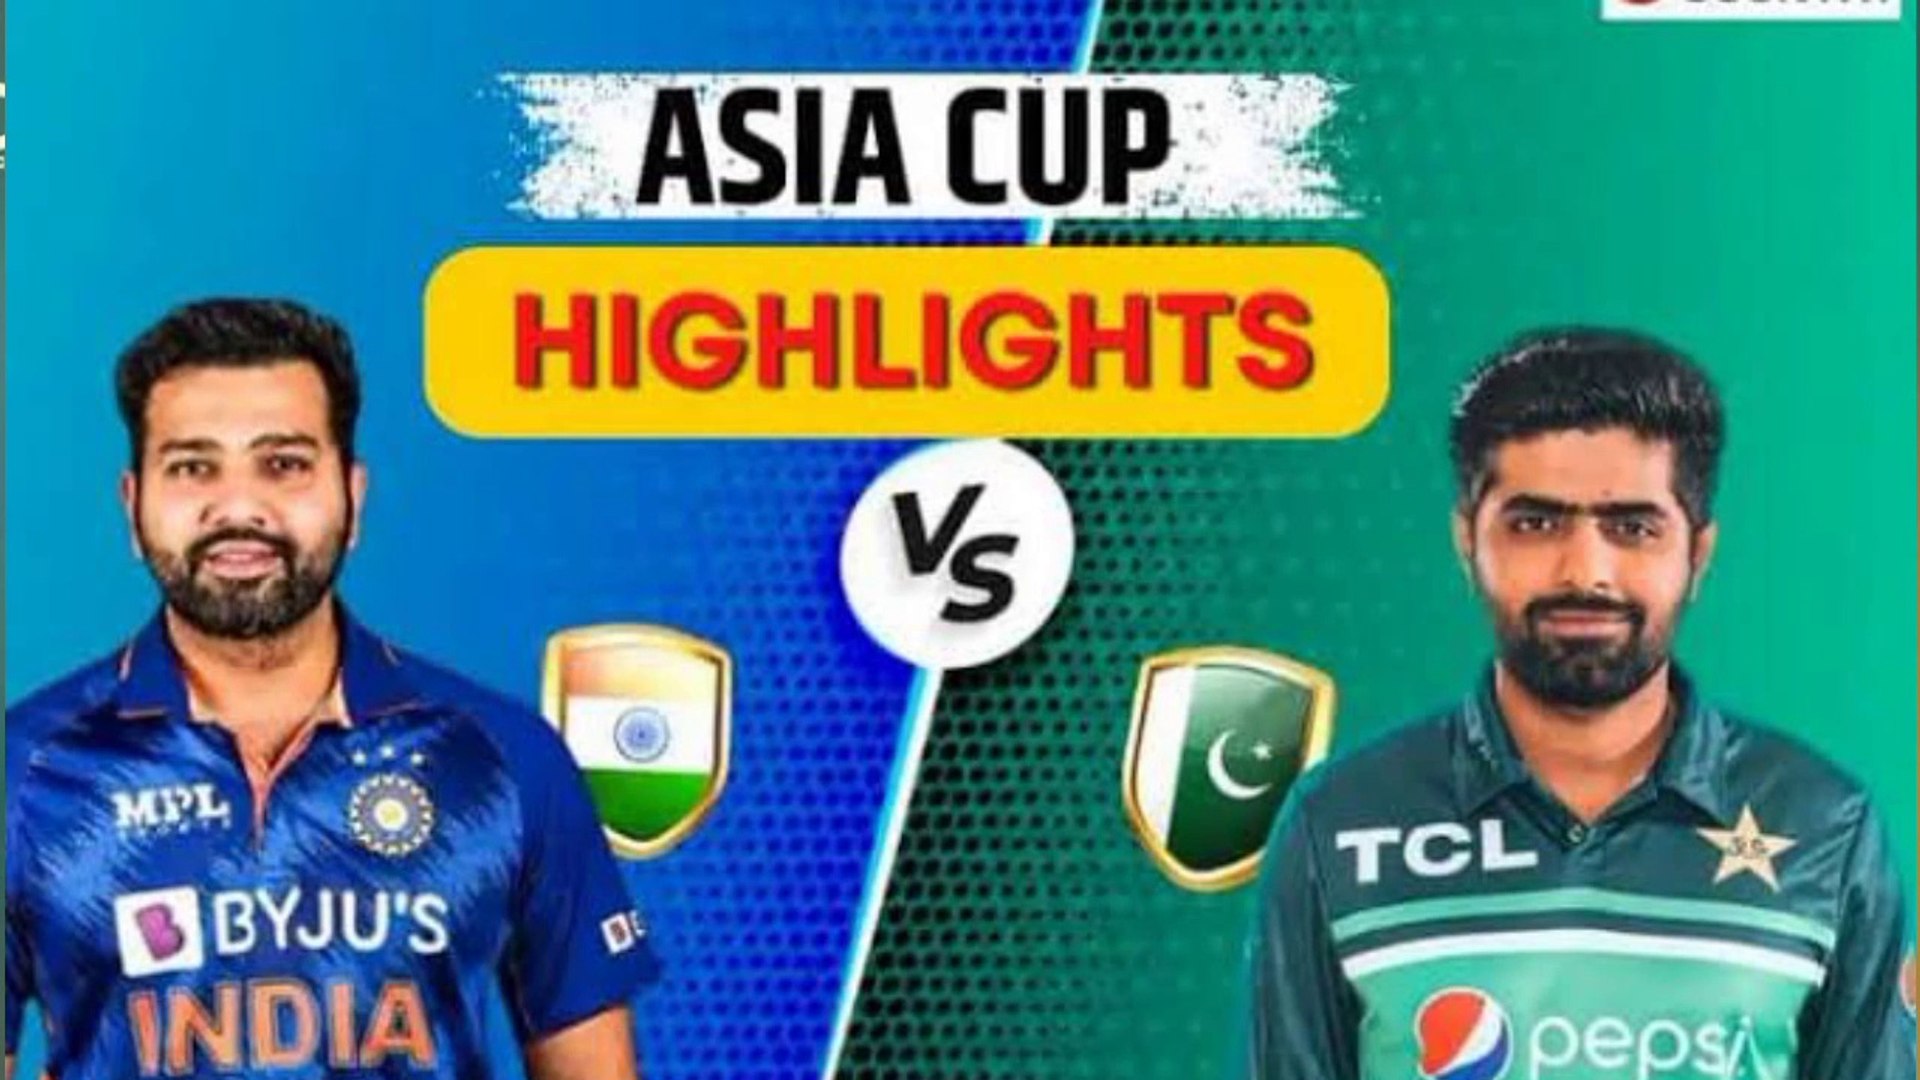 2022 asia cup videos